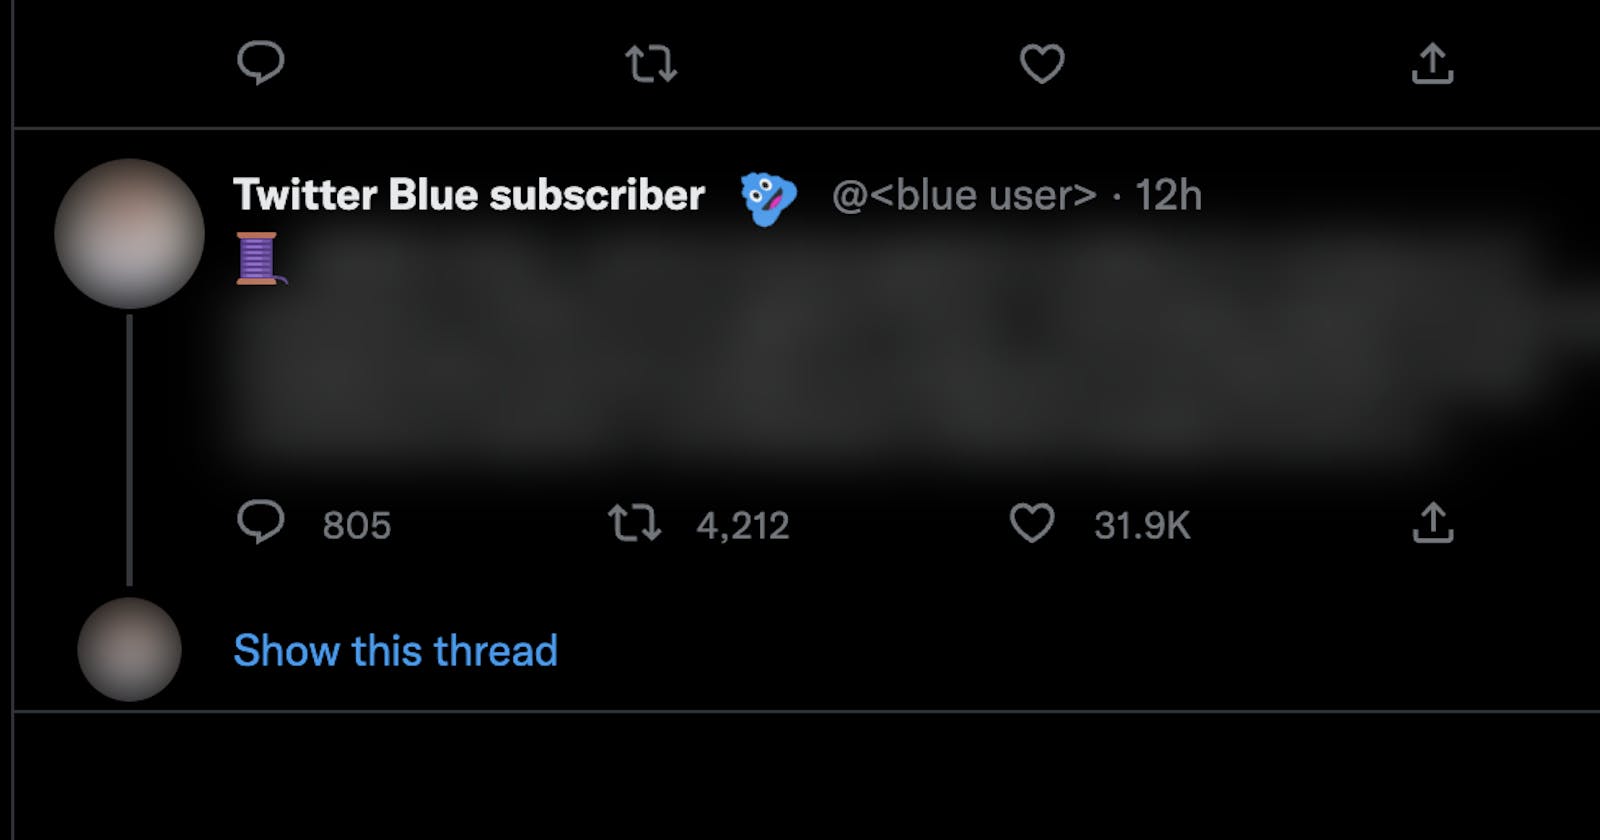 Replace Twitter Blue verified check marks with rotating blue poo emojis